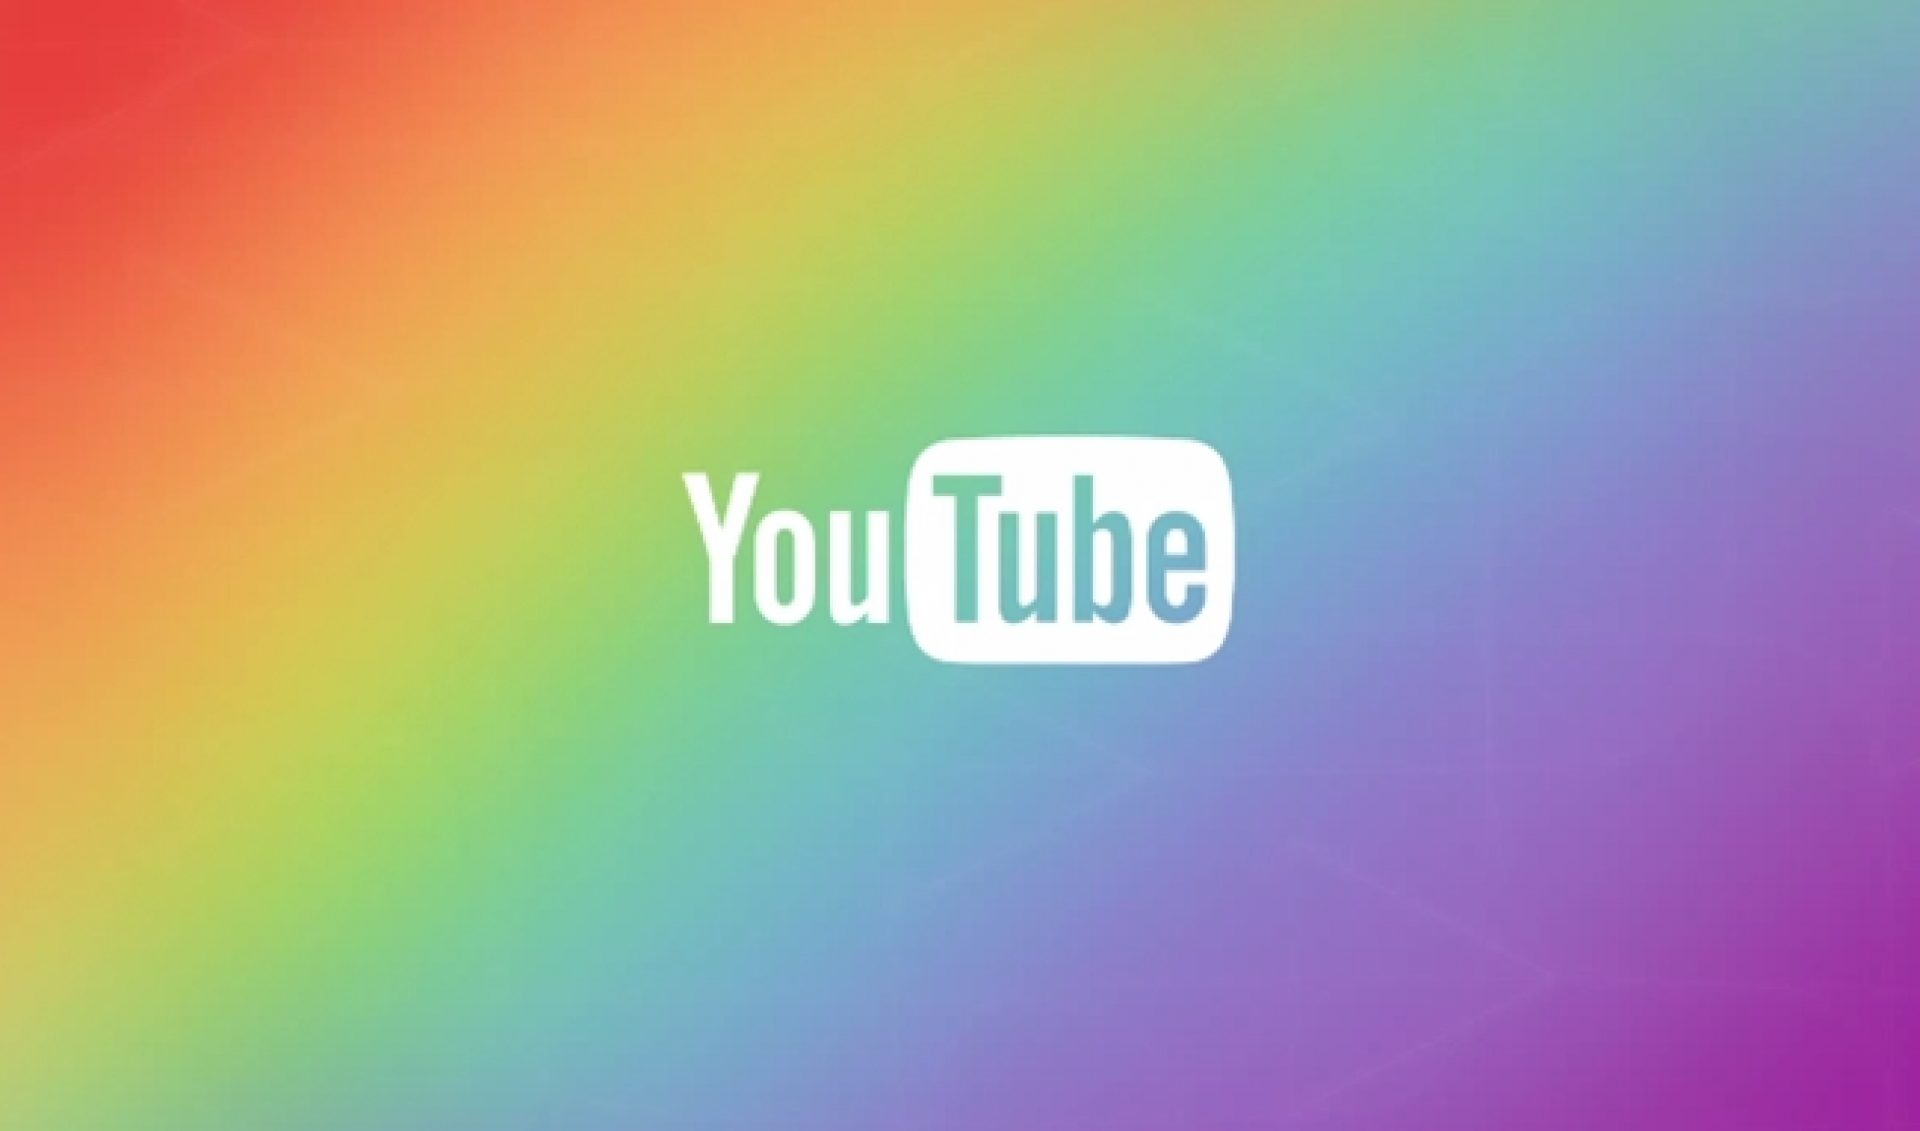 YouTube Shows It Is #ProudToLove With Sitewide LGBT Celebration